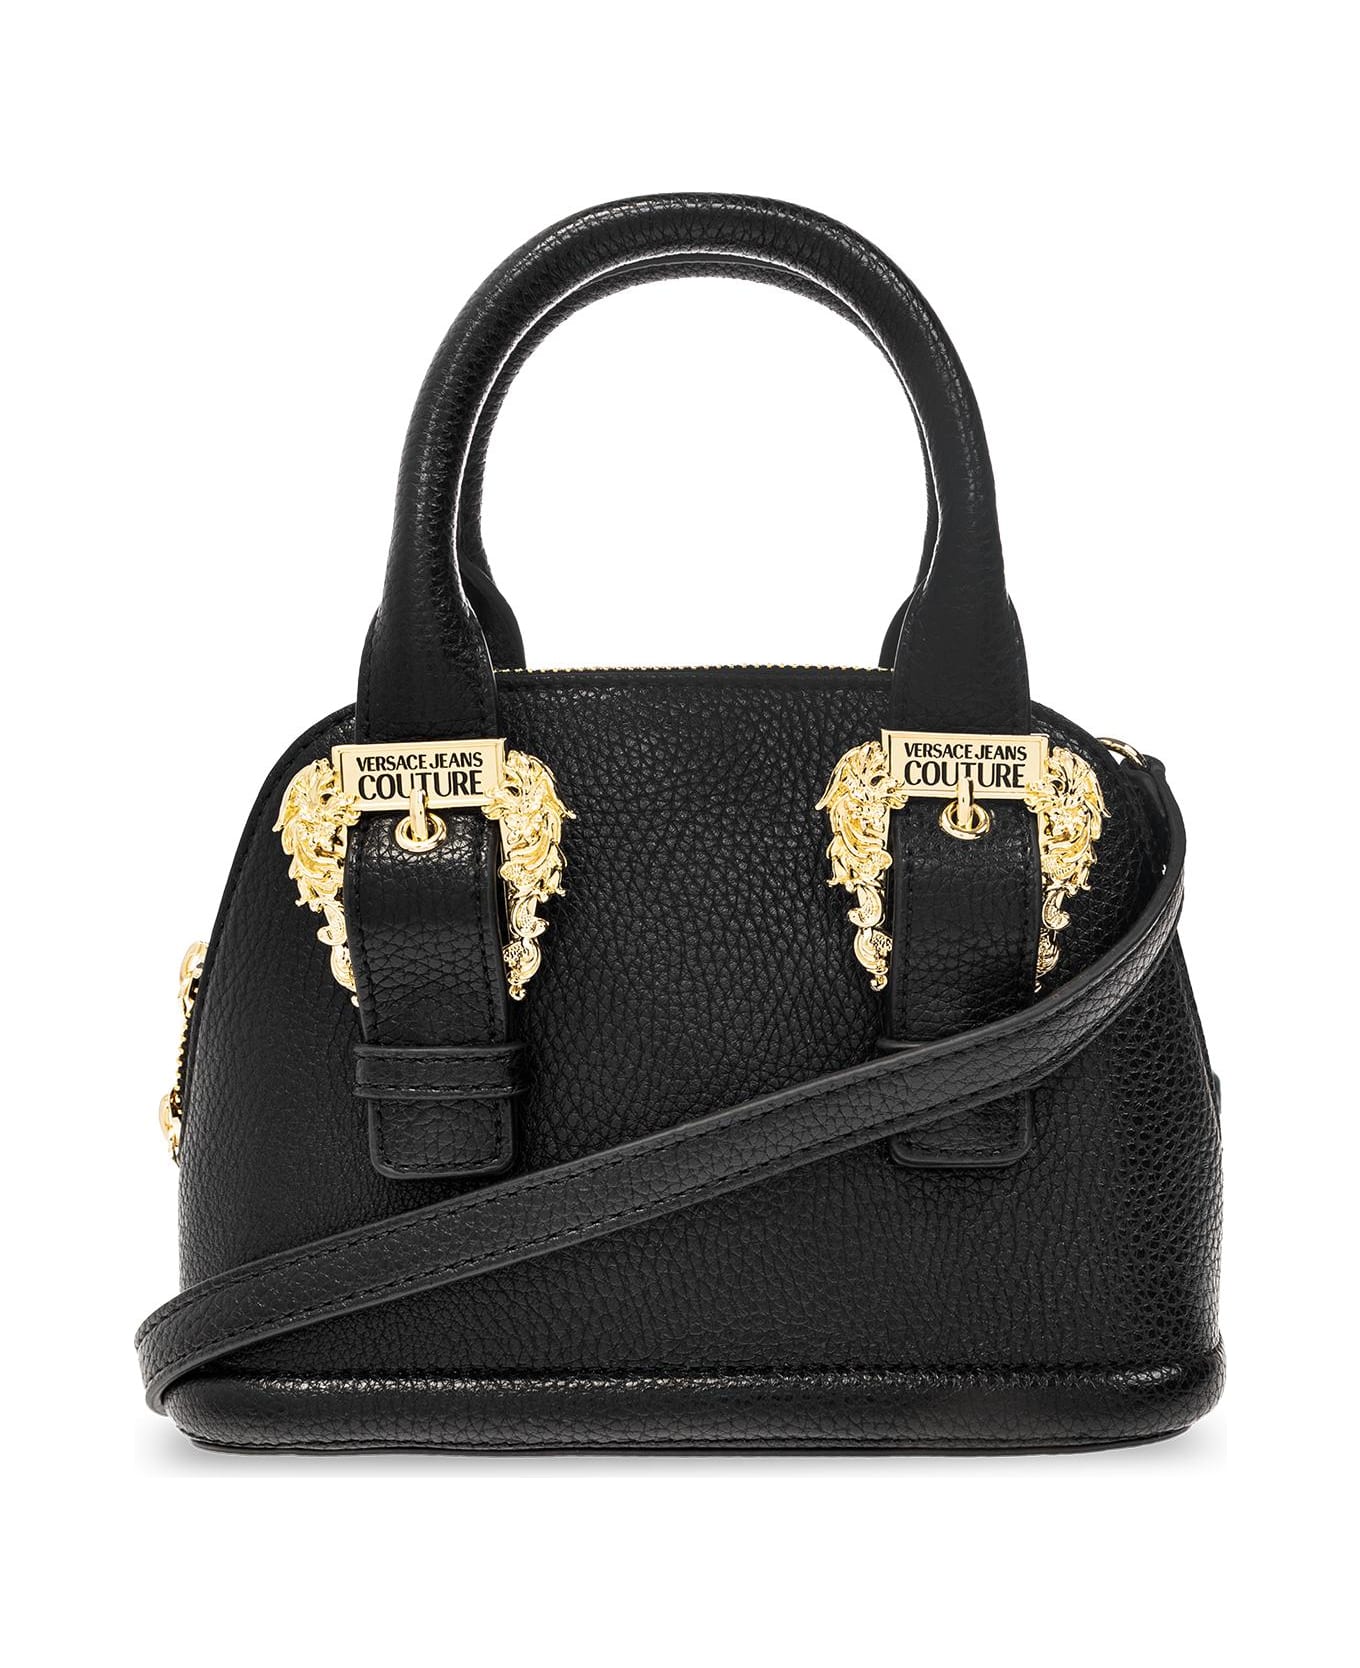 Versace Jeans Couture Bag - NERO トートバッグ